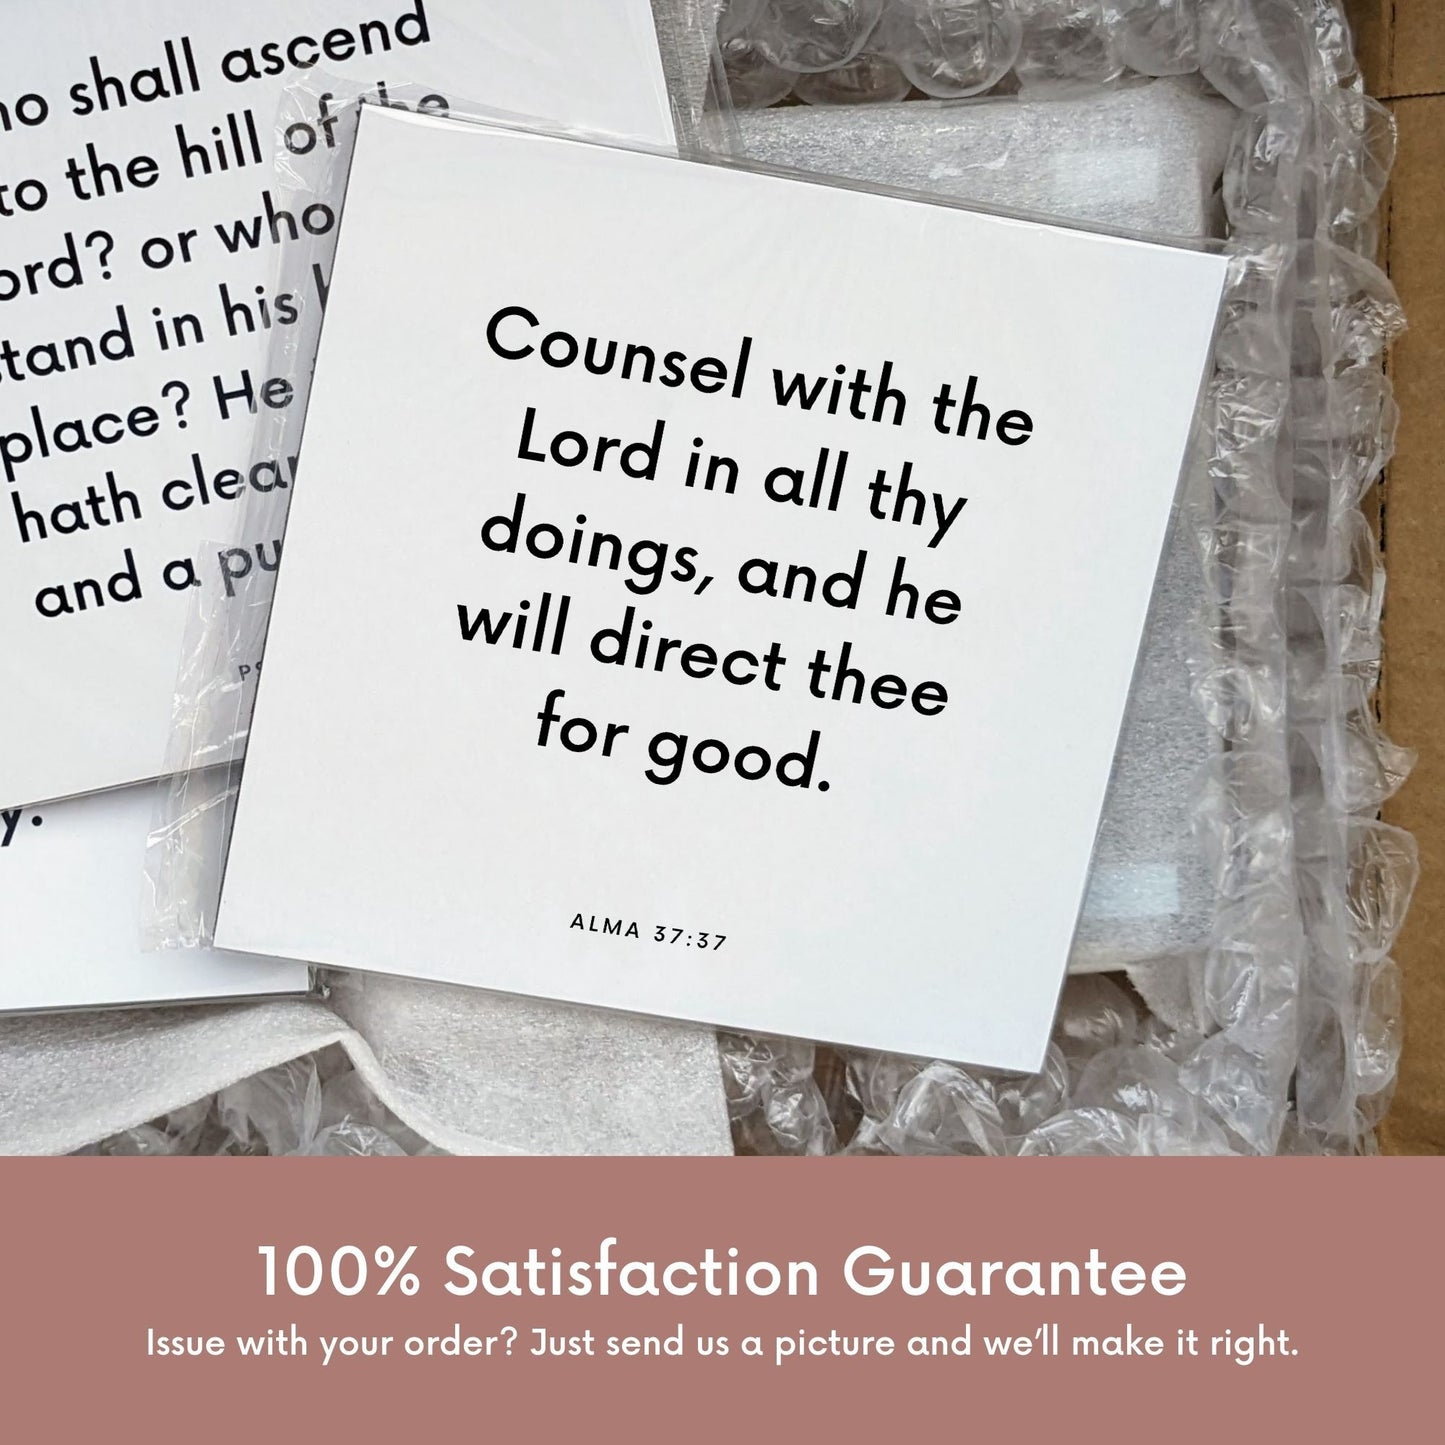 Shipping materials for scripture tile of Alma 37:37 - "Counsel with the Lord in all thy doings"